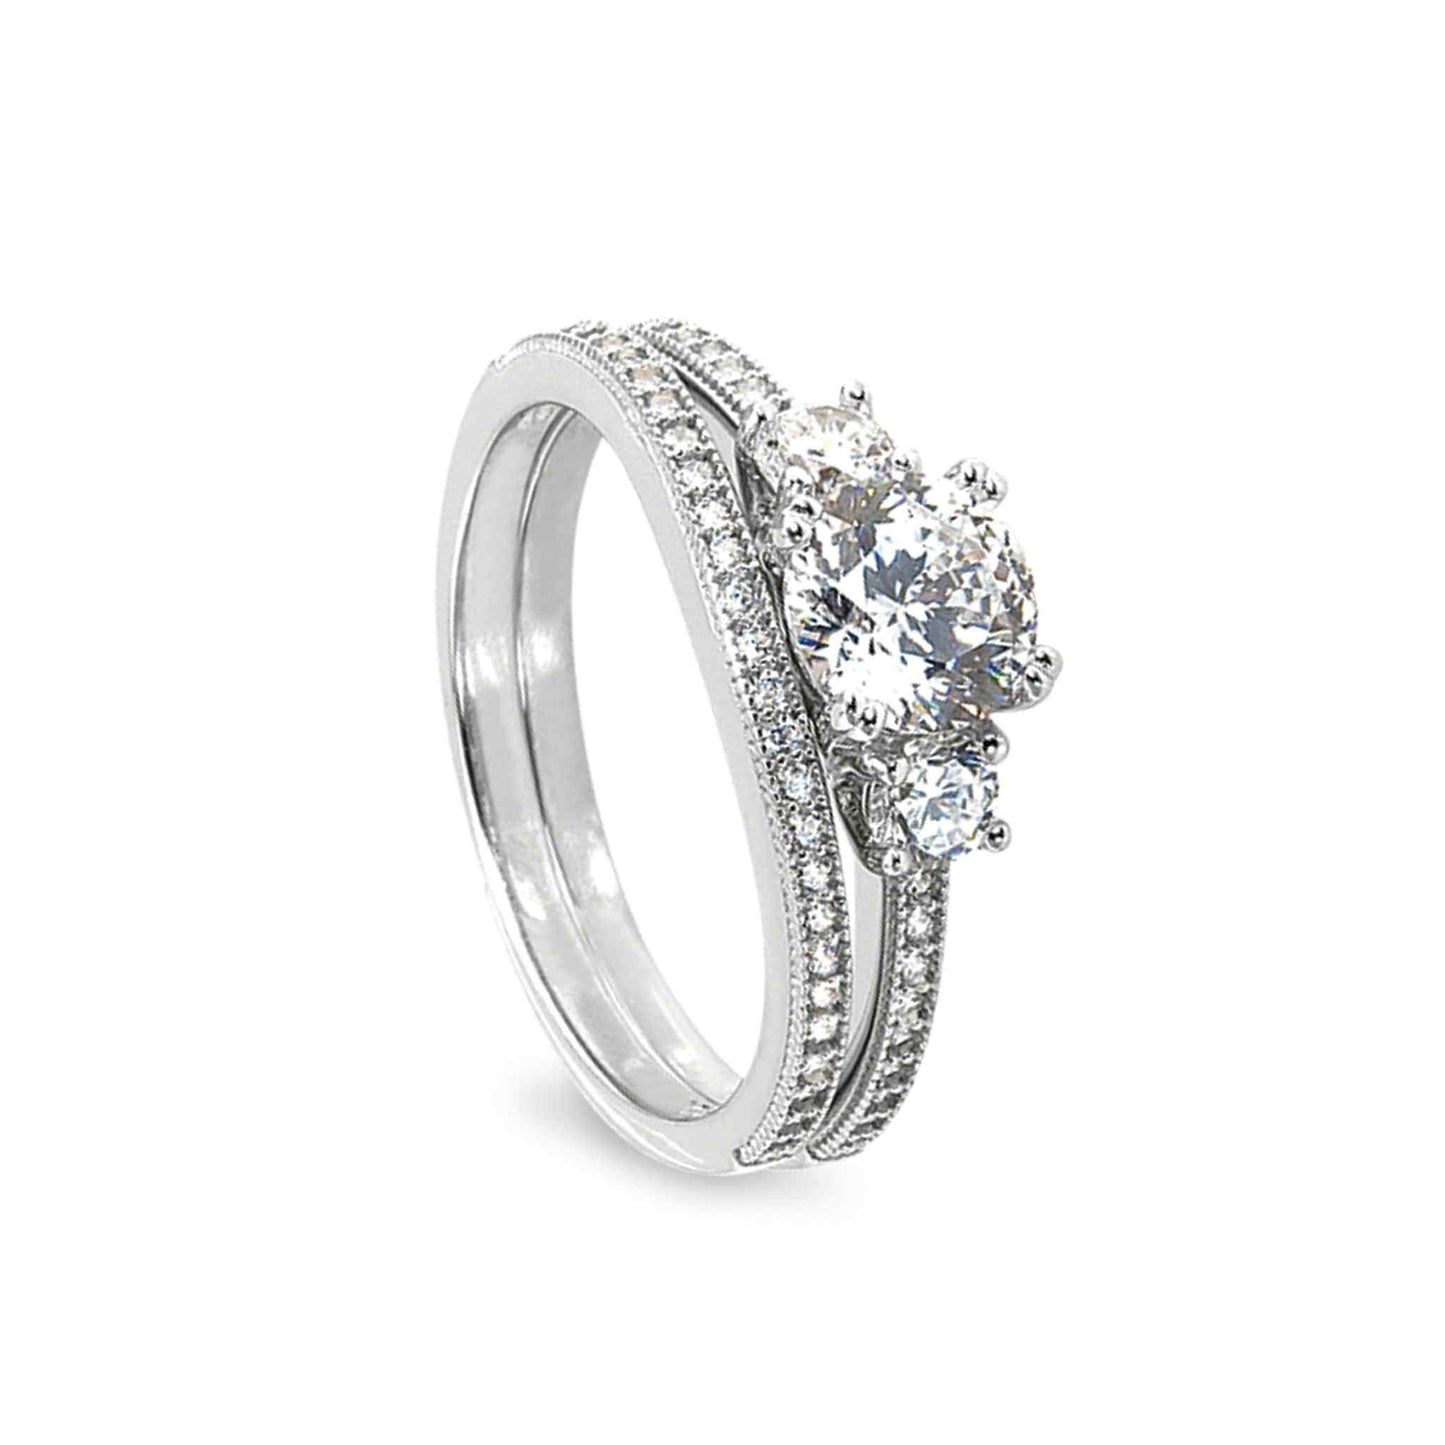 A three stone wedding ring set with 100facet simulated diamond displayed on a neutral white background.